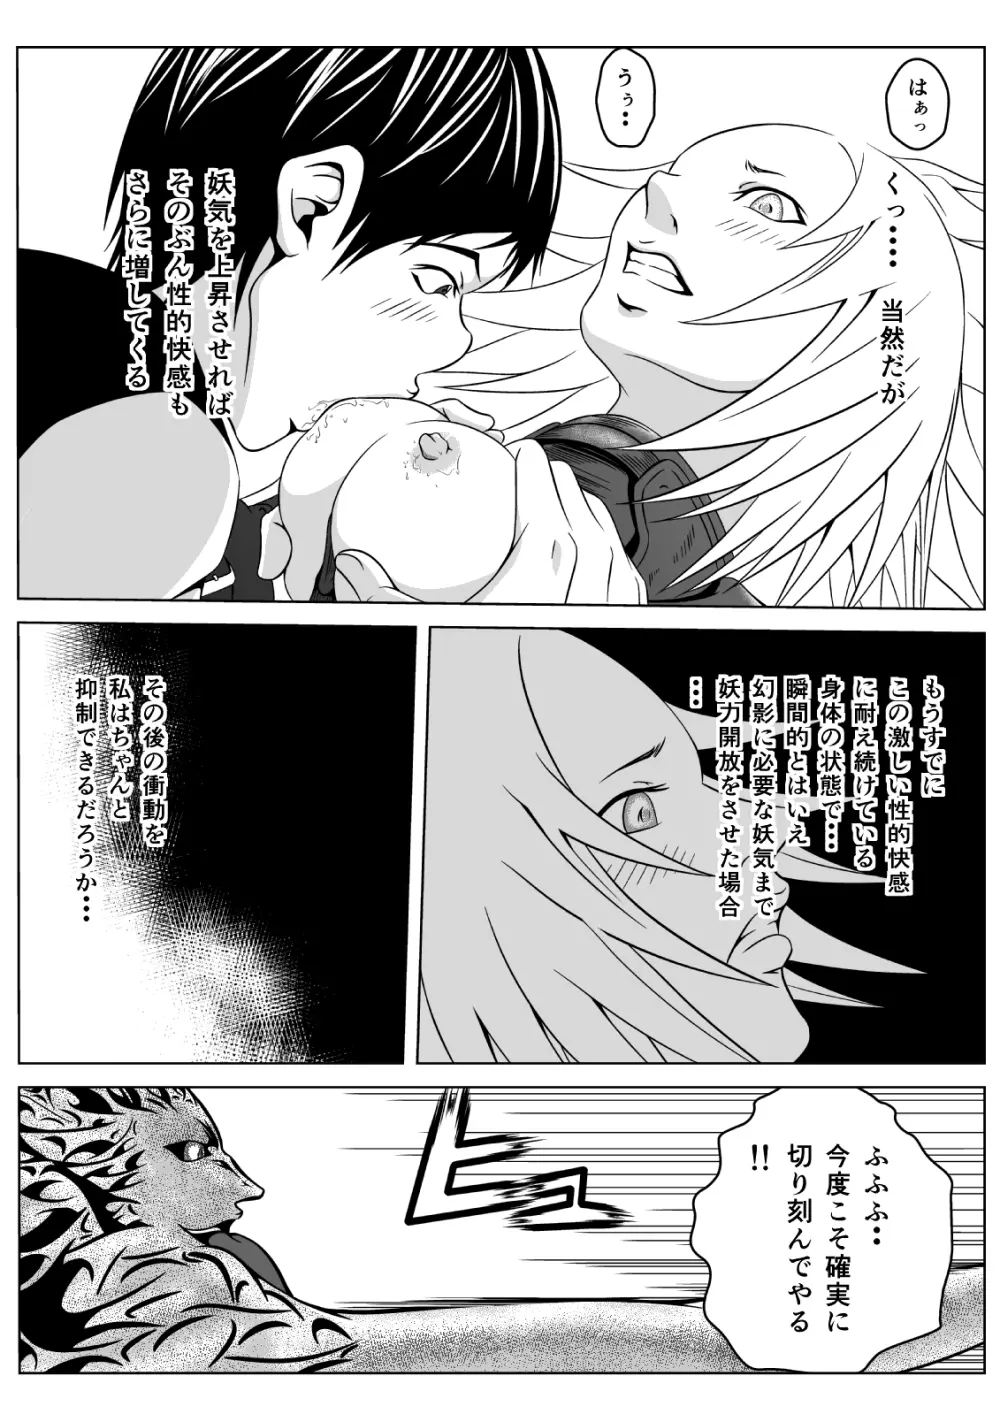 Ce0 嵌められた幻影 - page37